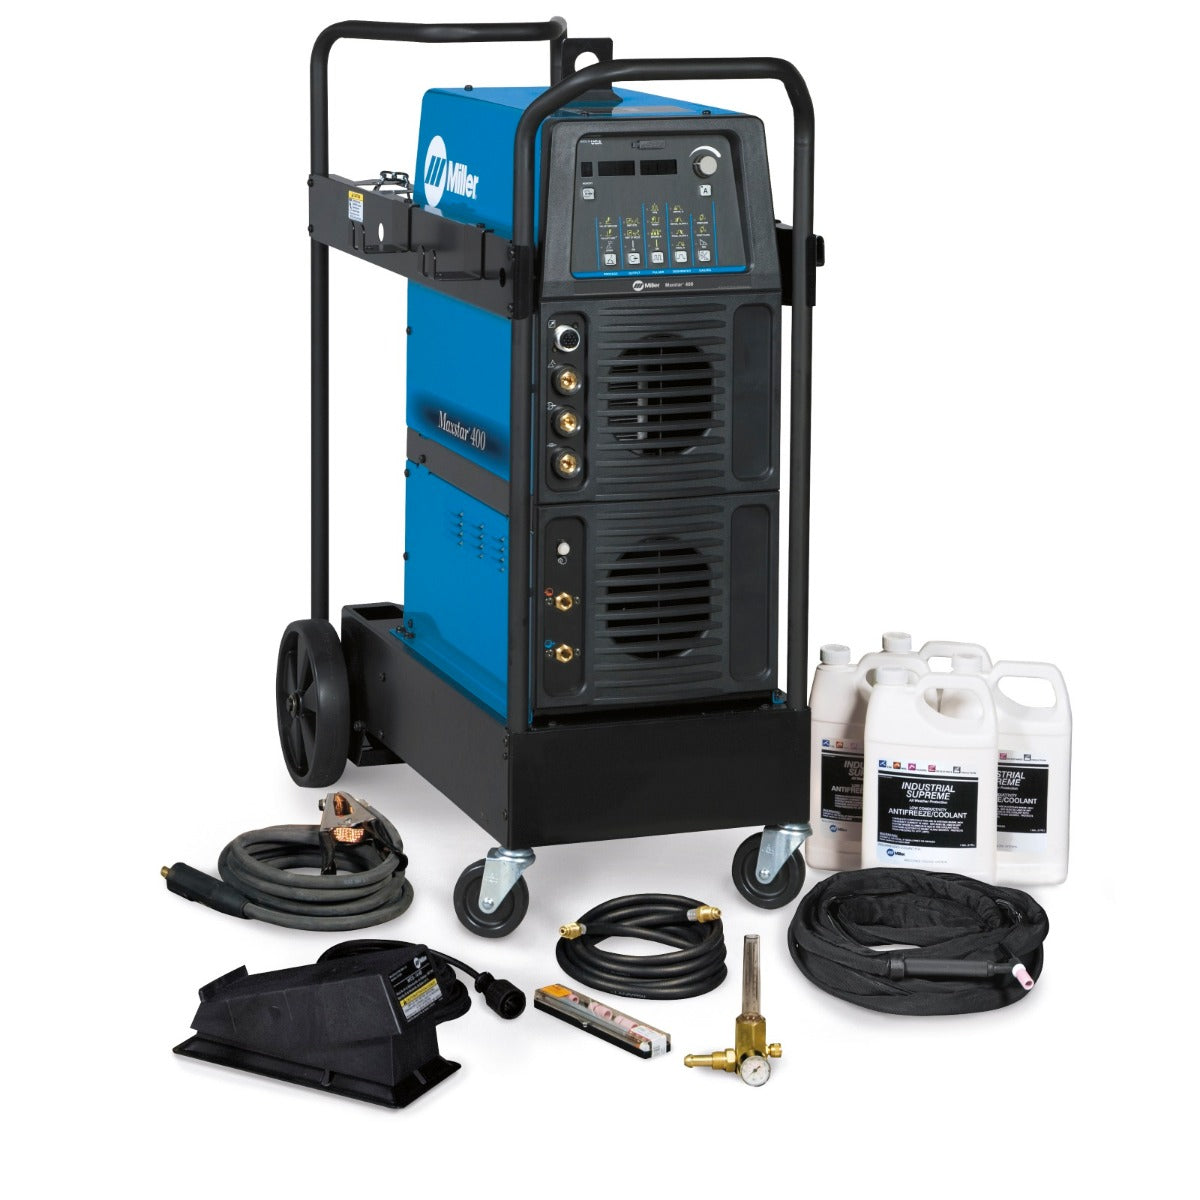 Miller Maxstar 350 TIG Welder and Water-Cooled Package with Foot Control (951624)